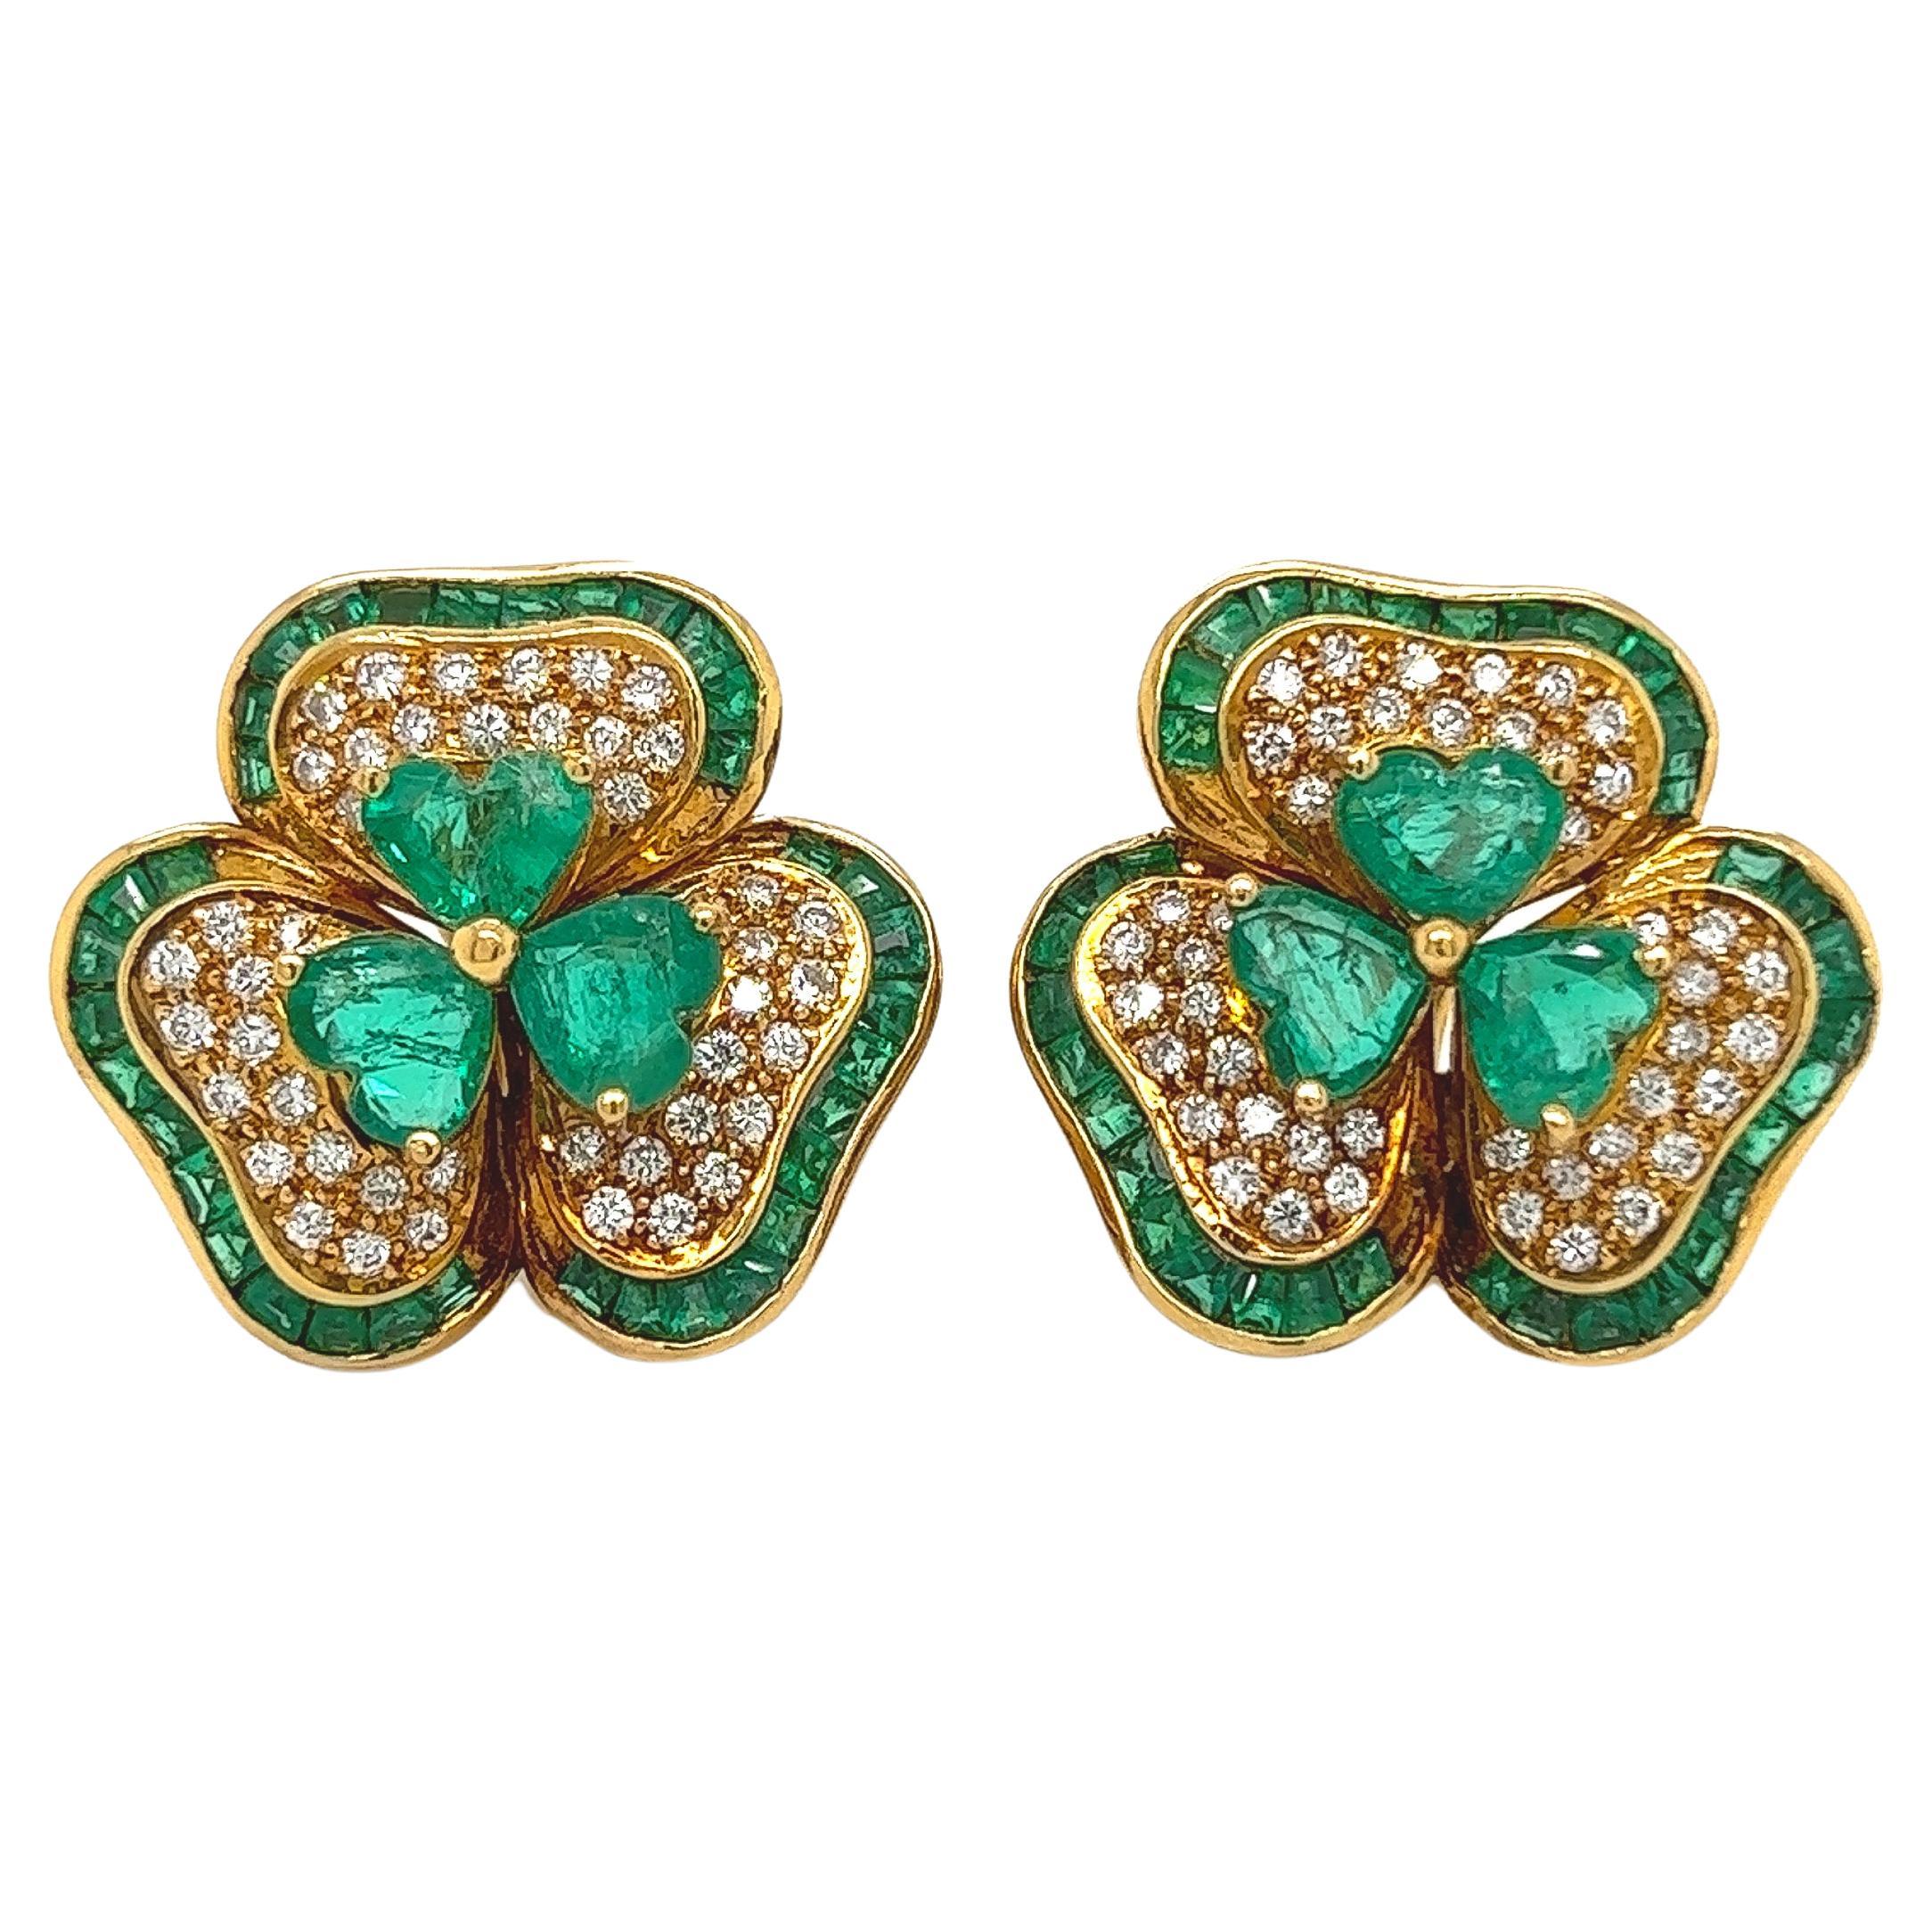 11.55 Total CT Lucky Clover 18K Yellow Gold Diamond & Colombian Emerald Earrings